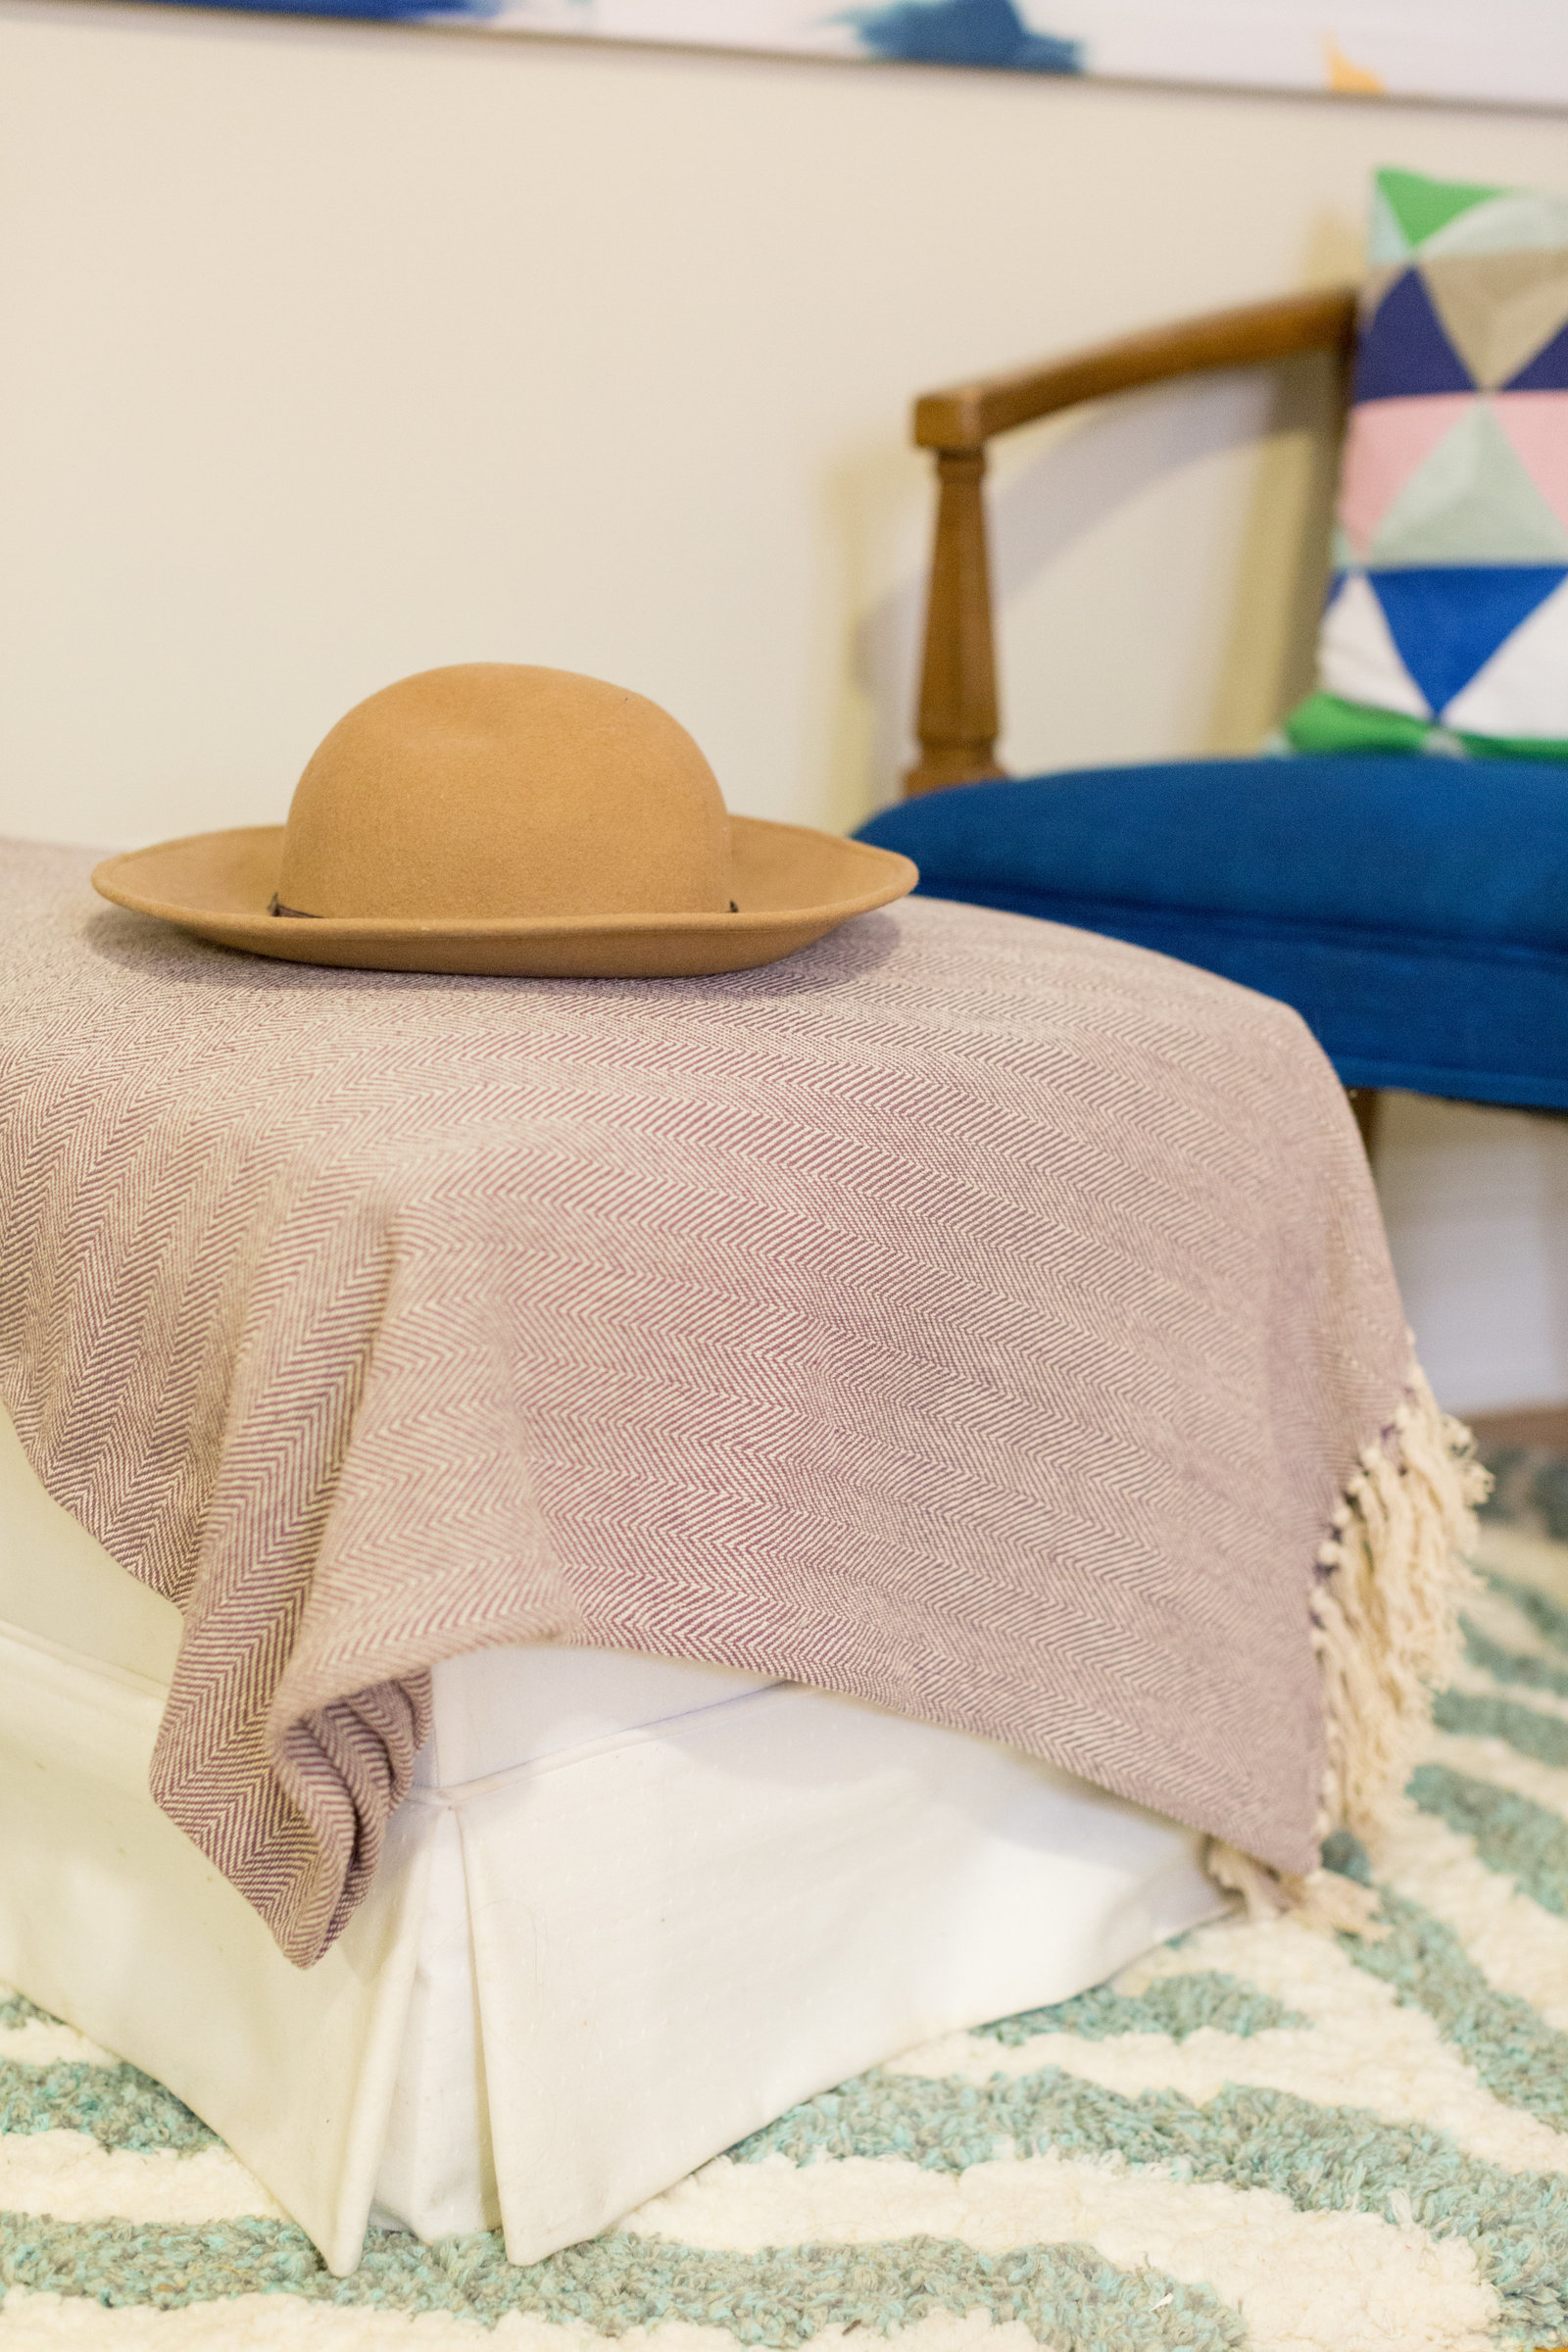 A tan sued hat on a blanket on an ottoman.